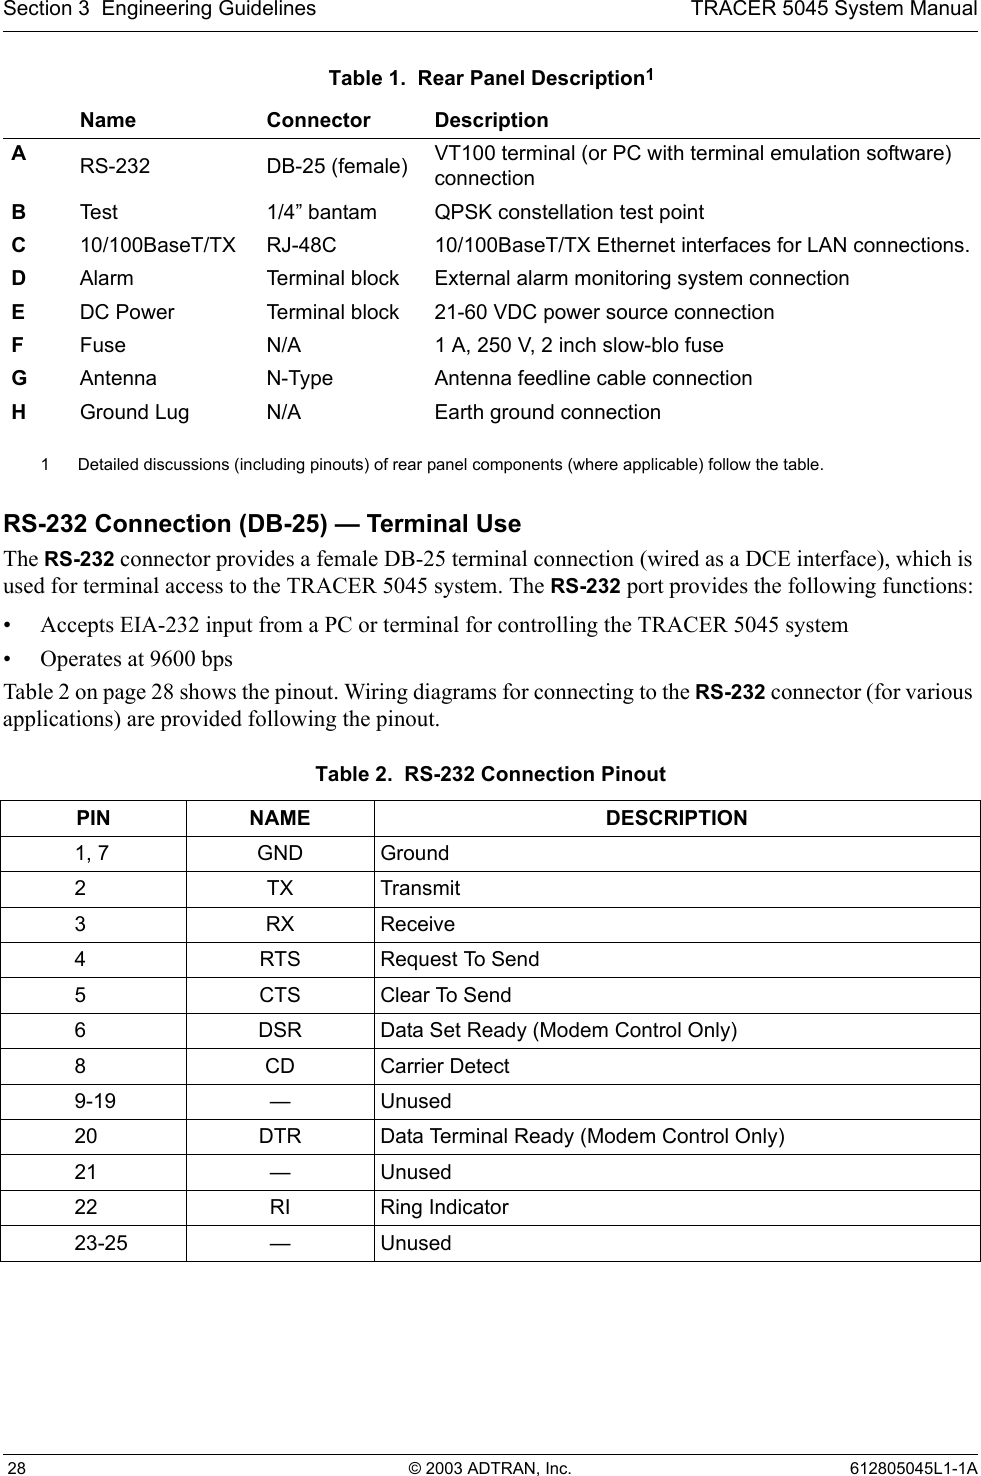 Section 3  Engineering Guidelines TRACER 5045 System Manual 28 © 2003 ADTRAN, Inc. 612805045L1-1ARS-232 Connection (DB-25) — Terminal UseThe RS-232 connector provides a female DB-25 terminal connection (wired as a DCE interface), which is used for terminal access to the TRACER 5045 system. The RS-232 port provides the following functions:• Accepts EIA-232 input from a PC or terminal for controlling the TRACER 5045 system• Operates at 9600 bpsTable 2 on page 28 shows the pinout. Wiring diagrams for connecting to the RS-232 connector (for various applications) are provided following the pinout.Table 1.  Rear Panel Description11 Detailed discussions (including pinouts) of rear panel components (where applicable) follow the table.Name Connector DescriptionARS-232 DB-25 (female) VT100 terminal (or PC with terminal emulation software) connectionBTes t 1/4” bantam  QPSK constellation test pointC10/100BaseT/TX RJ-48C 10/100BaseT/TX Ethernet interfaces for LAN connections.DAlarm Terminal block External alarm monitoring system connectionEDC Power Terminal block 21-60 VDC power source connectionFFuse N/A 1 A, 250 V, 2 inch slow-blo fuseGAntenna N-Type Antenna feedline cable connectionHGround Lug N/A Earth ground connectionTable 2.  RS-232 Connection Pinout  PIN NAME DESCRIPTION1, 7 GND Ground2TX Transmit3RX Receive4RTS Request To Send5CTS Clear To Send6DSR Data Set Ready (Modem Control Only)8CD Carrier Detect9-19 —Unused20 DTR Data Terminal Ready (Modem Control Only)21 —Unused22 RI Ring Indicator23-25 —Unused